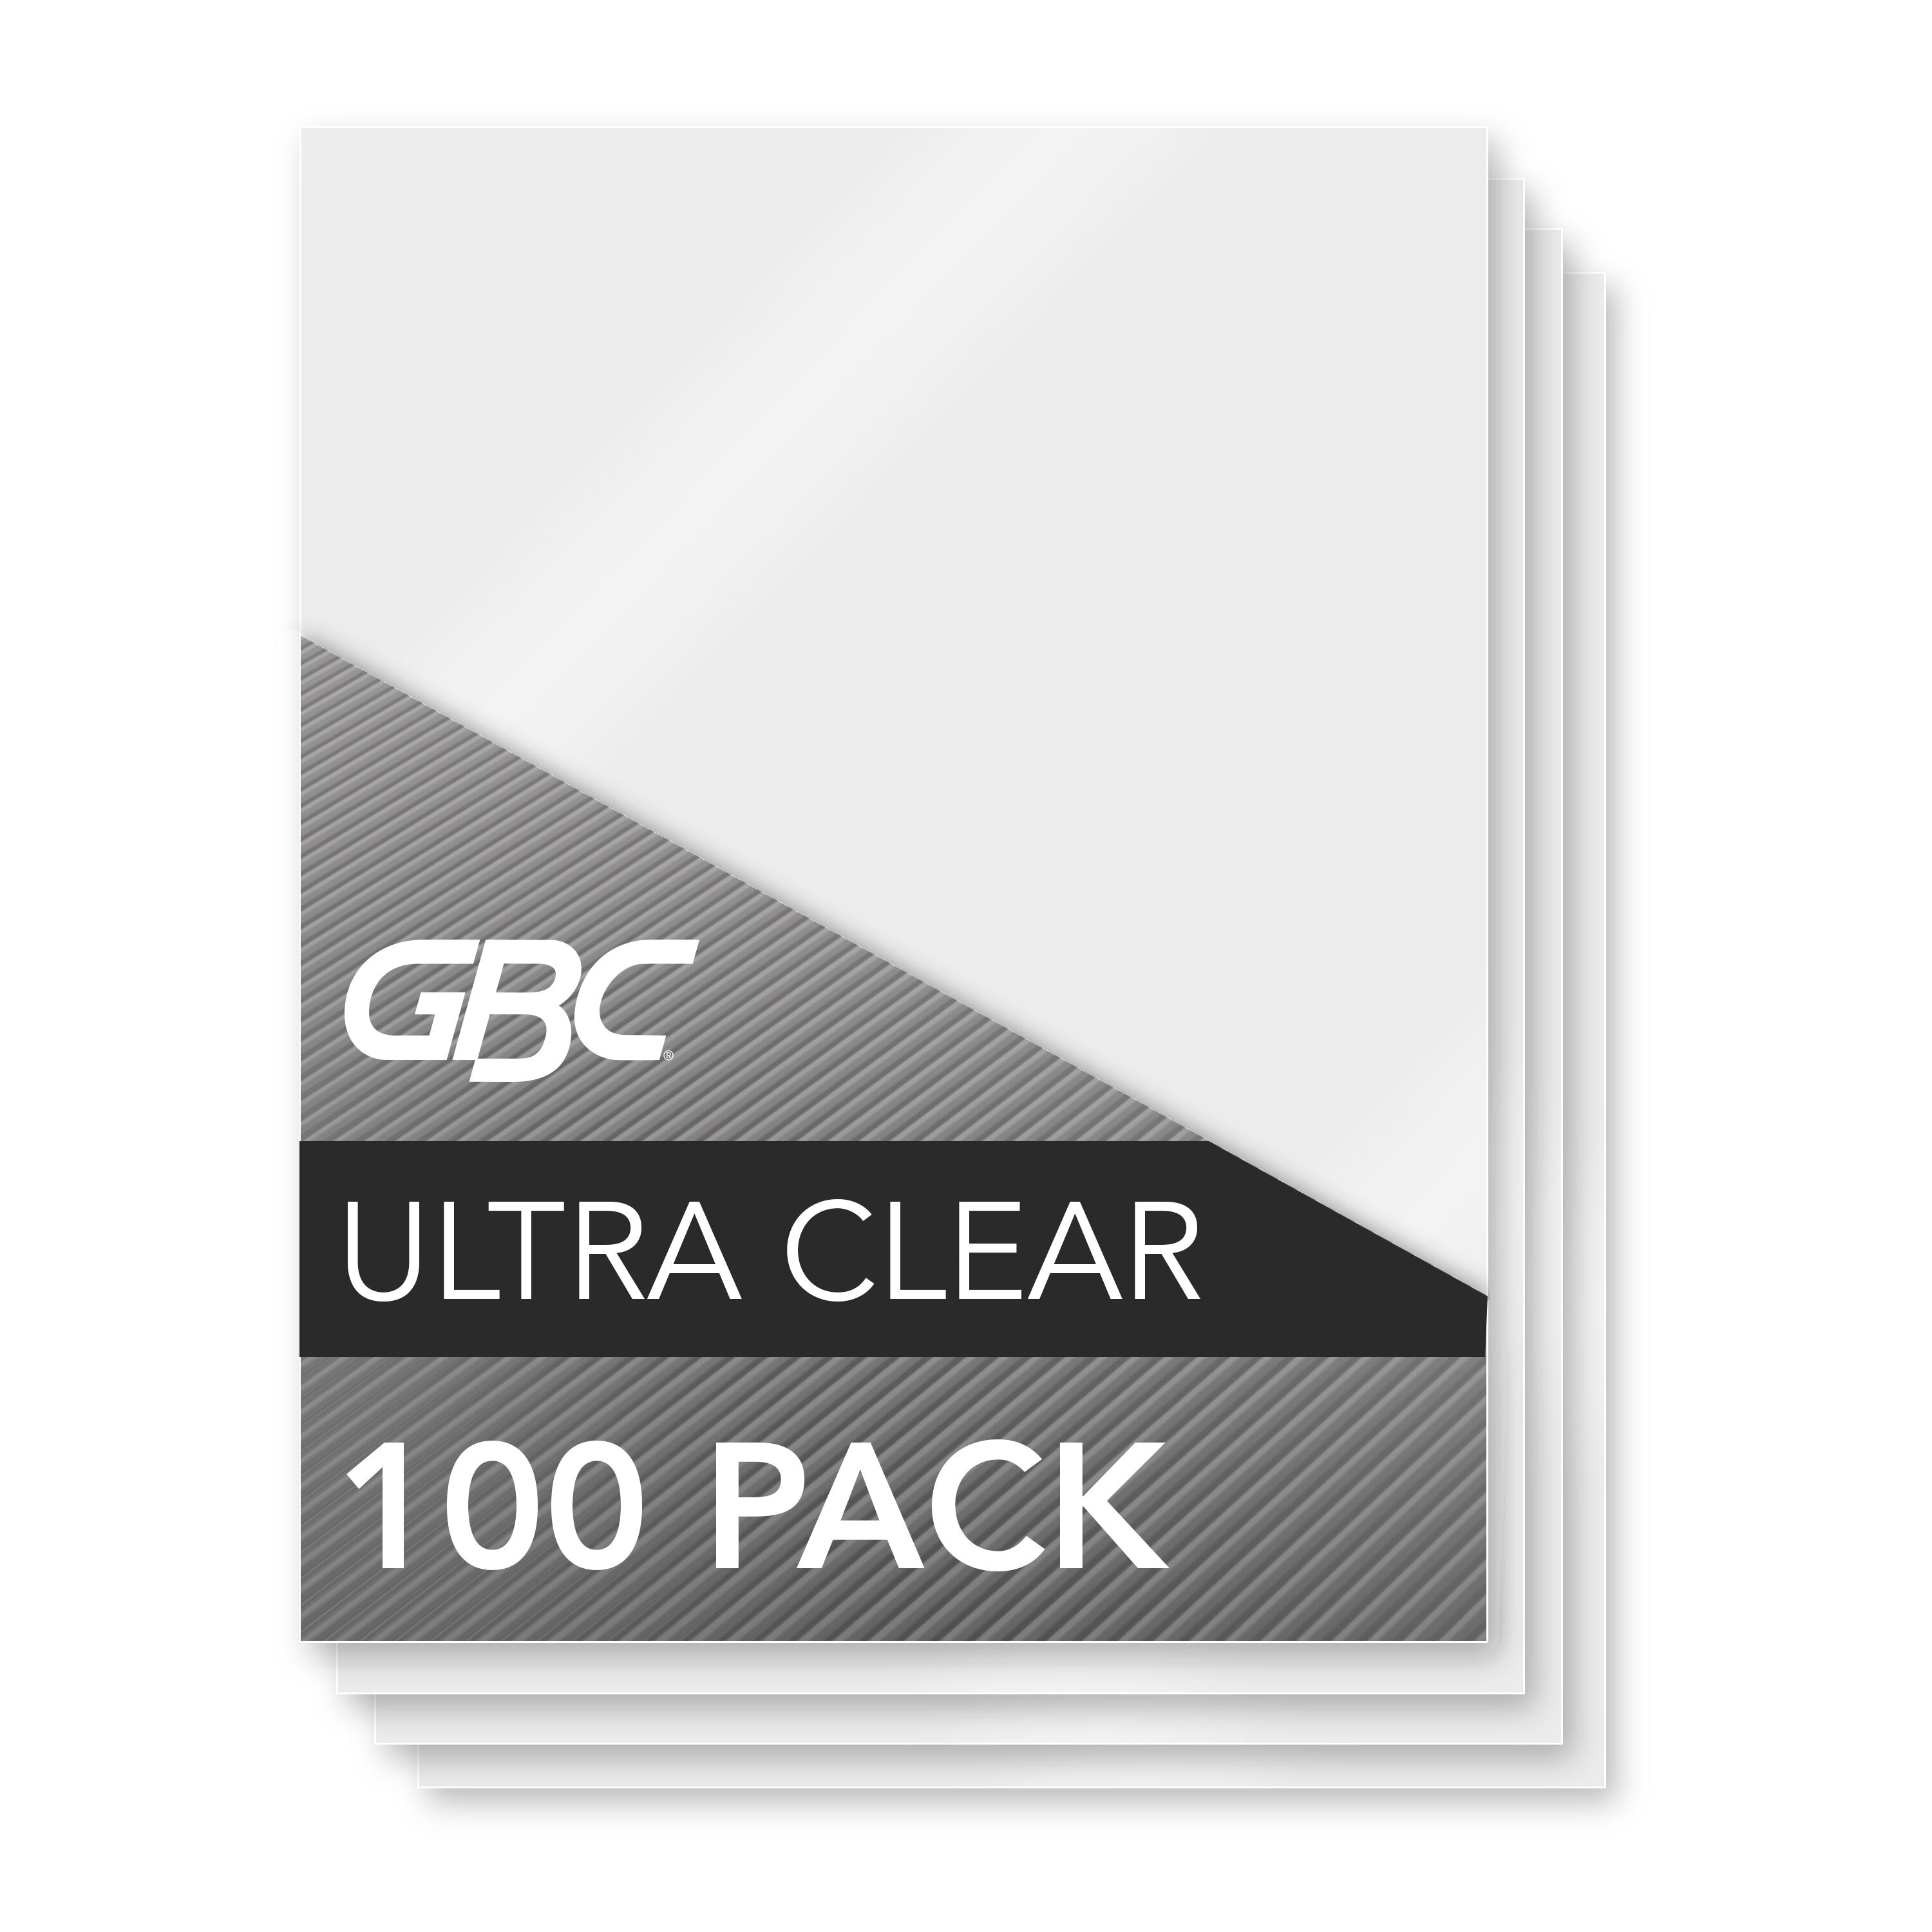 GBC Ultra Clear Thermal Laminating Pouches - Letter Size, Speed Format, 5 mil, 100 Pack